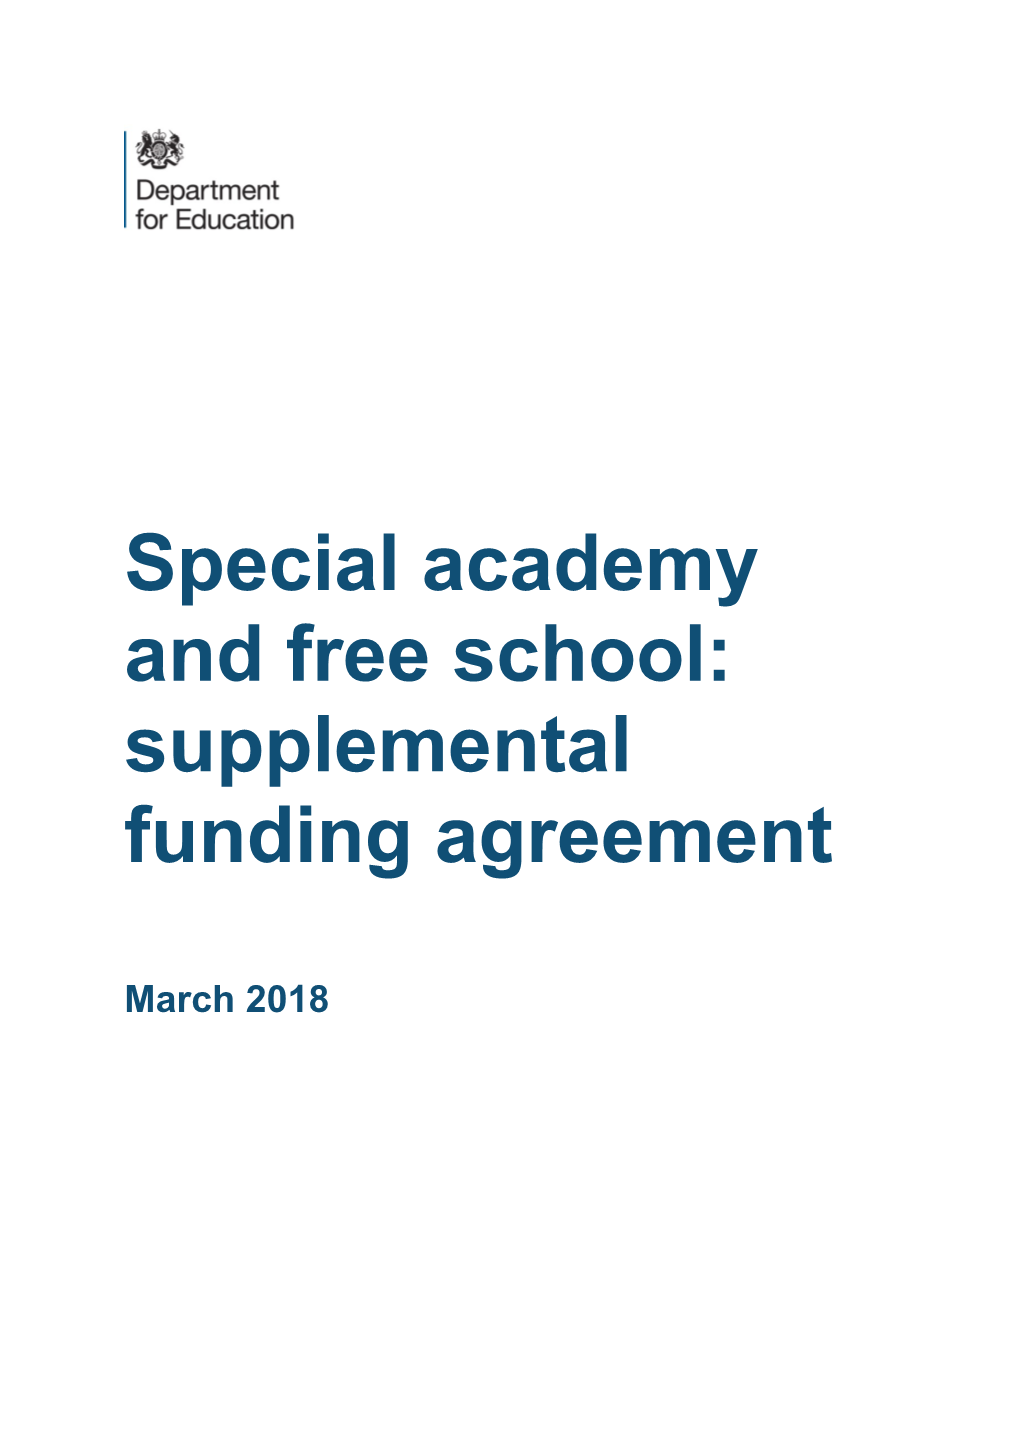 Specialacademy and Freeschool: Supplemental Funding Agreement